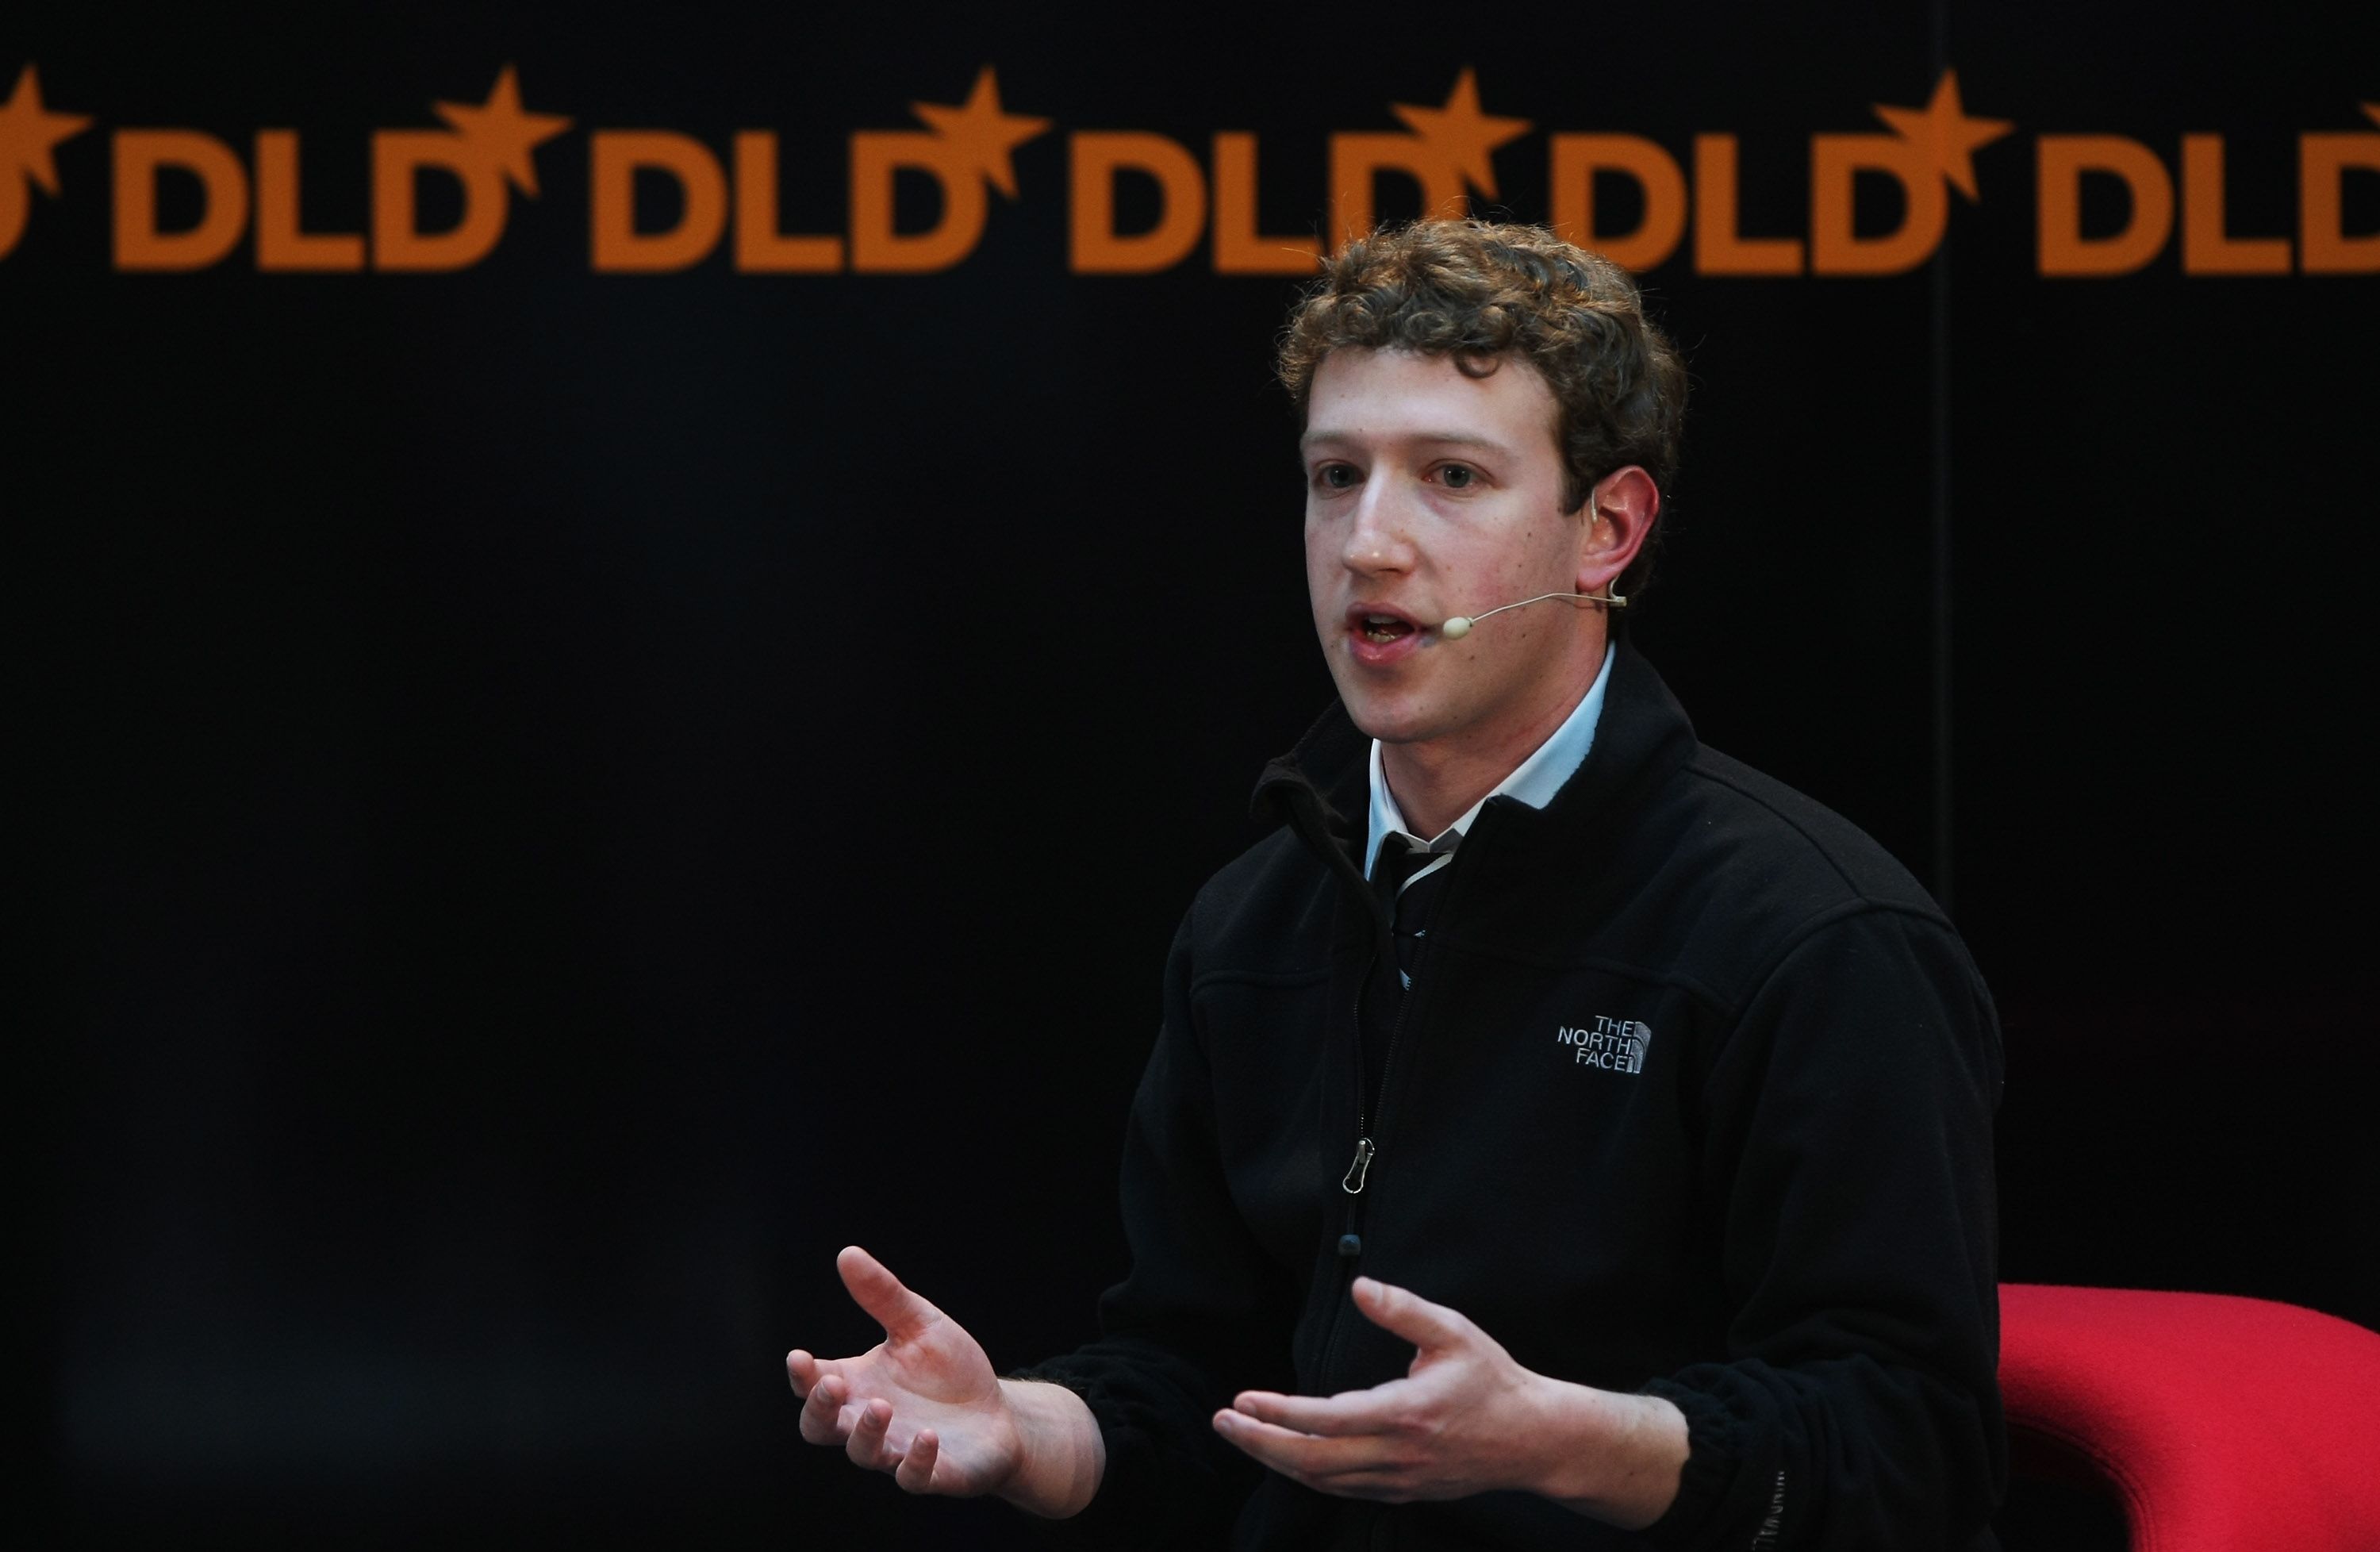 MUNICH, GERMANY - JANUARY 27: Mark Zuckerberg, CEO of Facebook, attends the Digital Life Design (DLD) conference on January 27, 2009 in Munich, Germany. DLD brings together global leaders and creators from the digital world. (Photo by Ralph Orlowski/Getty Images for Burda Media)